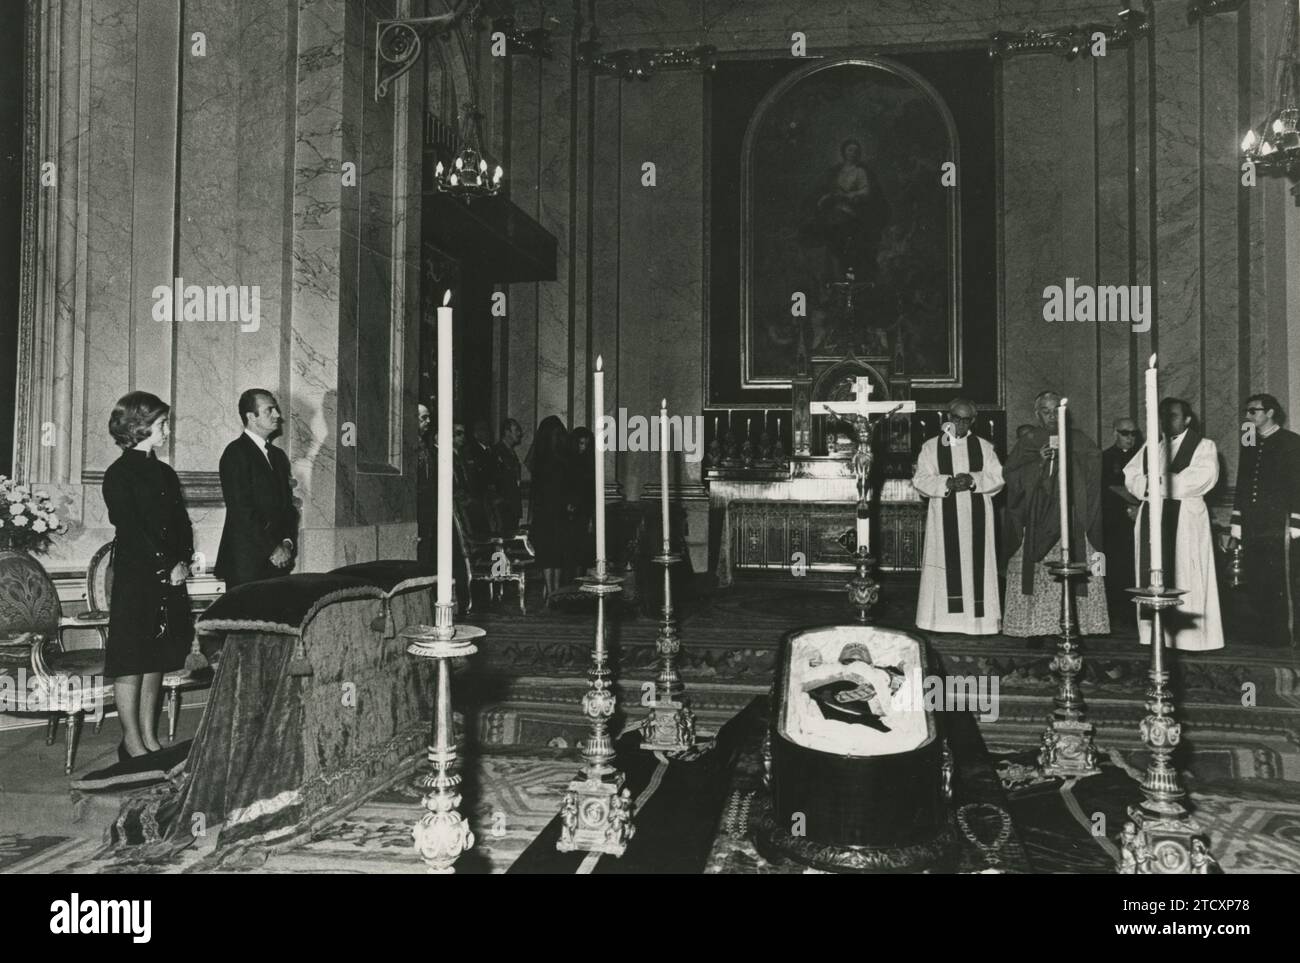 Madrid, 11/20/1975. Death of the Head of State, Mr. Francisco Franco Bahamonde. ?Corpore insepulto? Mass, celebrated in El Pardo and officiated by Don Vicente Enrique y Tarancón, Cardinal Archbishop of Madrid and president of the Spanish Episcopal Conference. In the image, SS. MM. Don Juan Carlos and Doña Sofía, presiding over the official mourning. Credit: Album / Archivo ABC Stock Photo